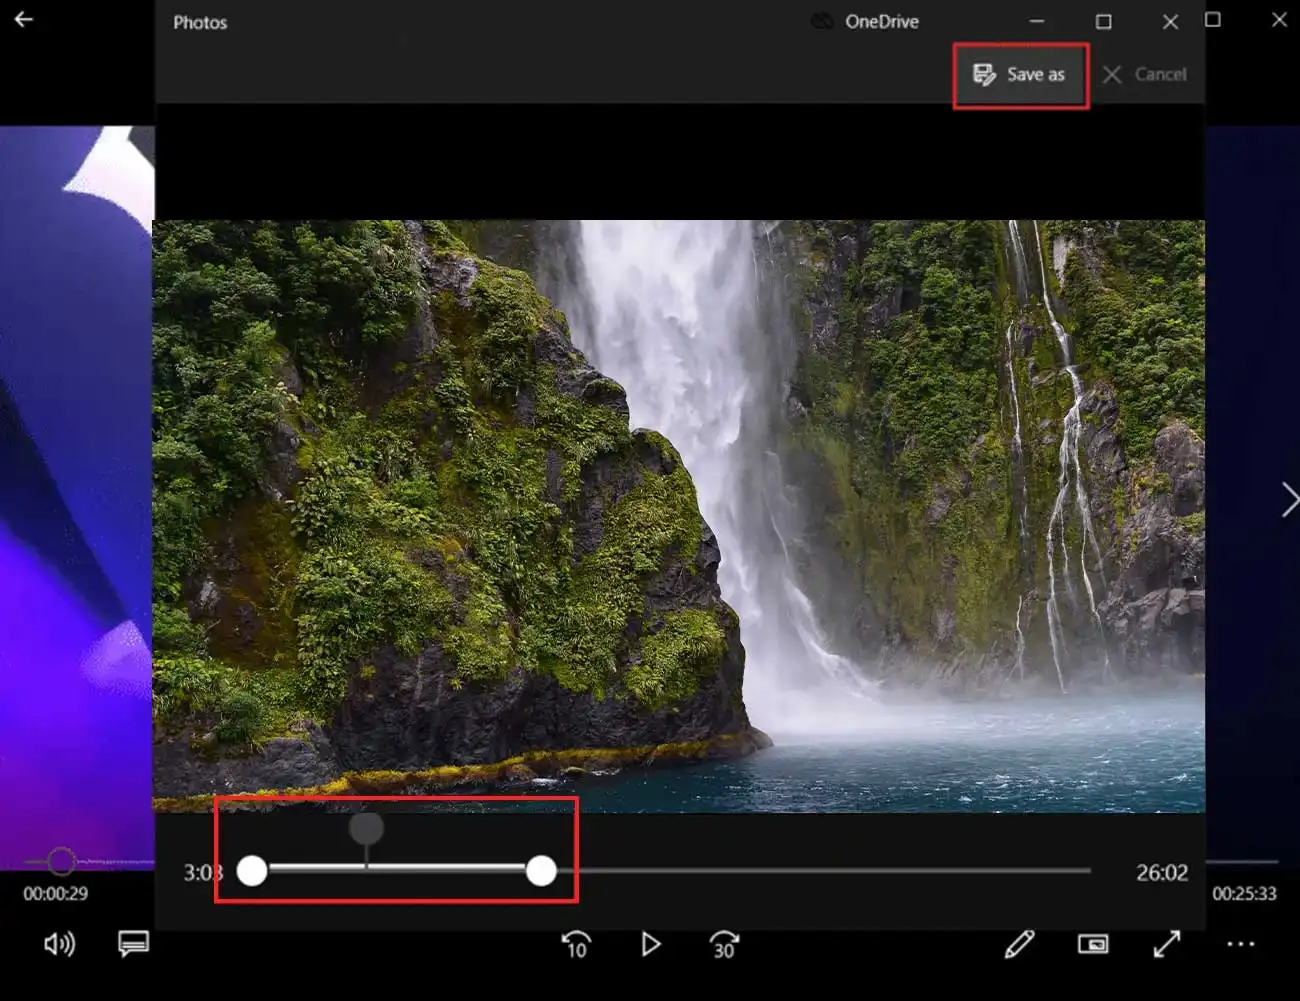 Slide the slider to the right to trim the videovideo